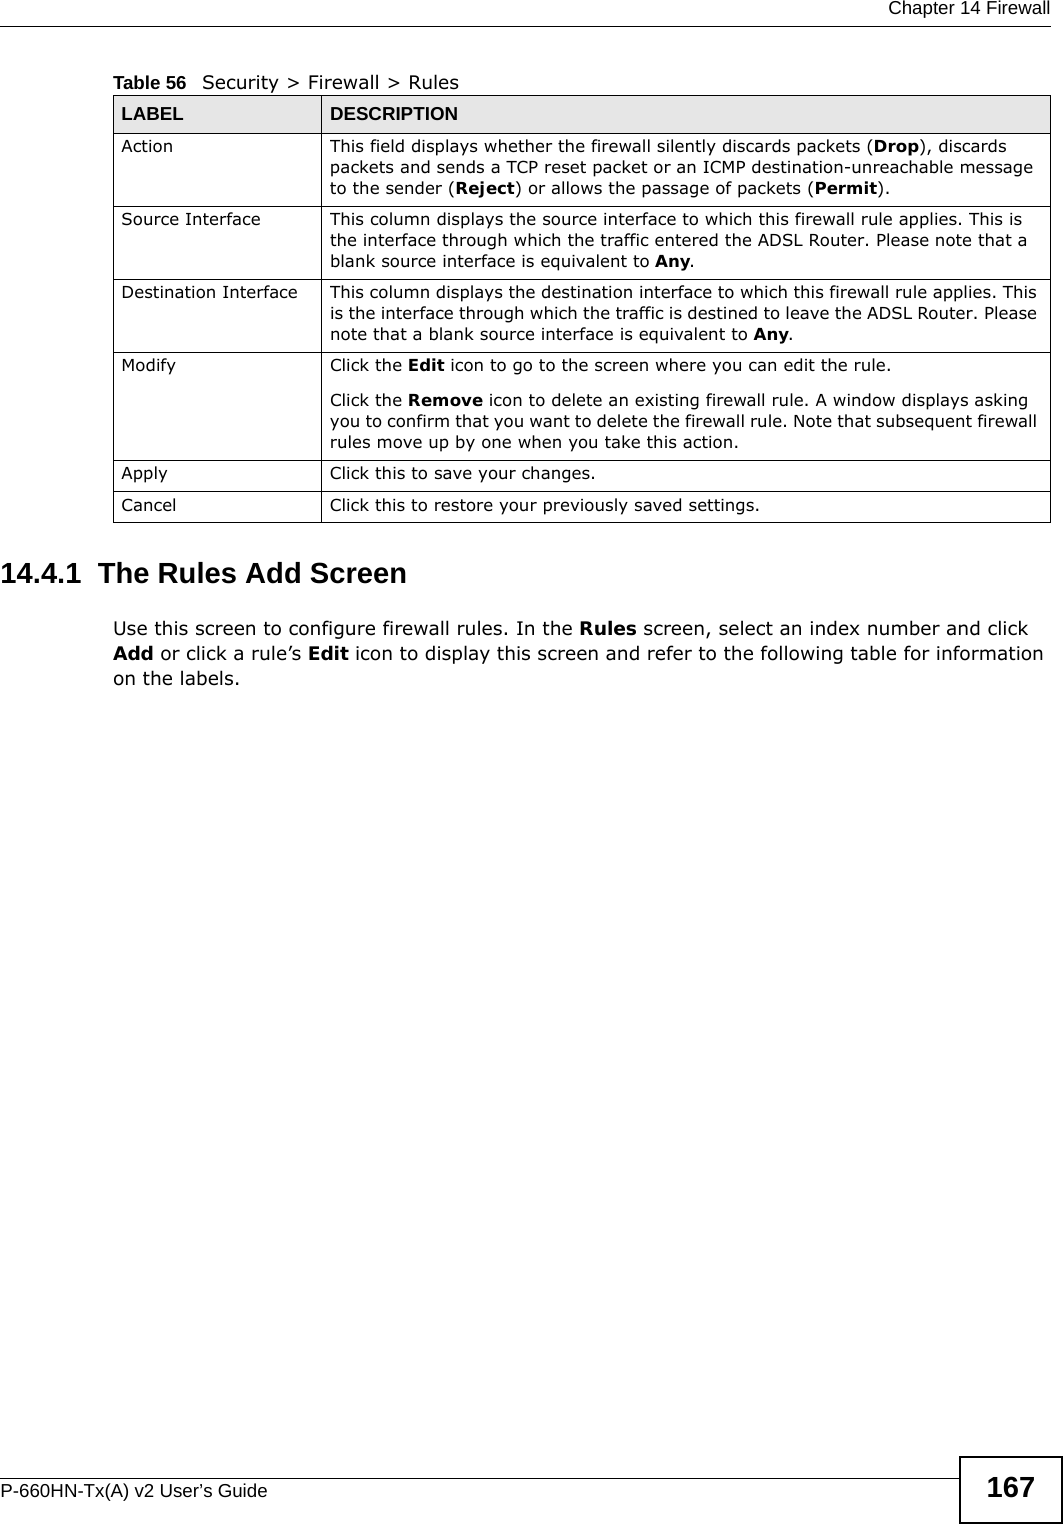  Chapter 14 FirewallP-660HN-Tx(A) v2 User’s Guide 16714.4.1  The Rules Add ScreenUse this screen to configure firewall rules. In the Rules screen, select an index number and click Add or click a rule’s Edit icon to display this screen and refer to the following table for information on the labels.Action This field displays whether the firewall silently discards packets (Drop), discards packets and sends a TCP reset packet or an ICMP destination-unreachable message to the sender (Reject) or allows the passage of packets (Permit).Source Interface This column displays the source interface to which this firewall rule applies. This is the interface through which the traffic entered the ADSL Router. Please note that a blank source interface is equivalent to Any.Destination Interface This column displays the destination interface to which this firewall rule applies. This is the interface through which the traffic is destined to leave the ADSL Router. Please note that a blank source interface is equivalent to Any.Modify Click the Edit icon to go to the screen where you can edit the rule.Click the Remove icon to delete an existing firewall rule. A window displays asking you to confirm that you want to delete the firewall rule. Note that subsequent firewall rules move up by one when you take this action.Apply Click this to save your changes.Cancel Click this to restore your previously saved settings.Table 56   Security &gt; Firewall &gt; RulesLABEL DESCRIPTION